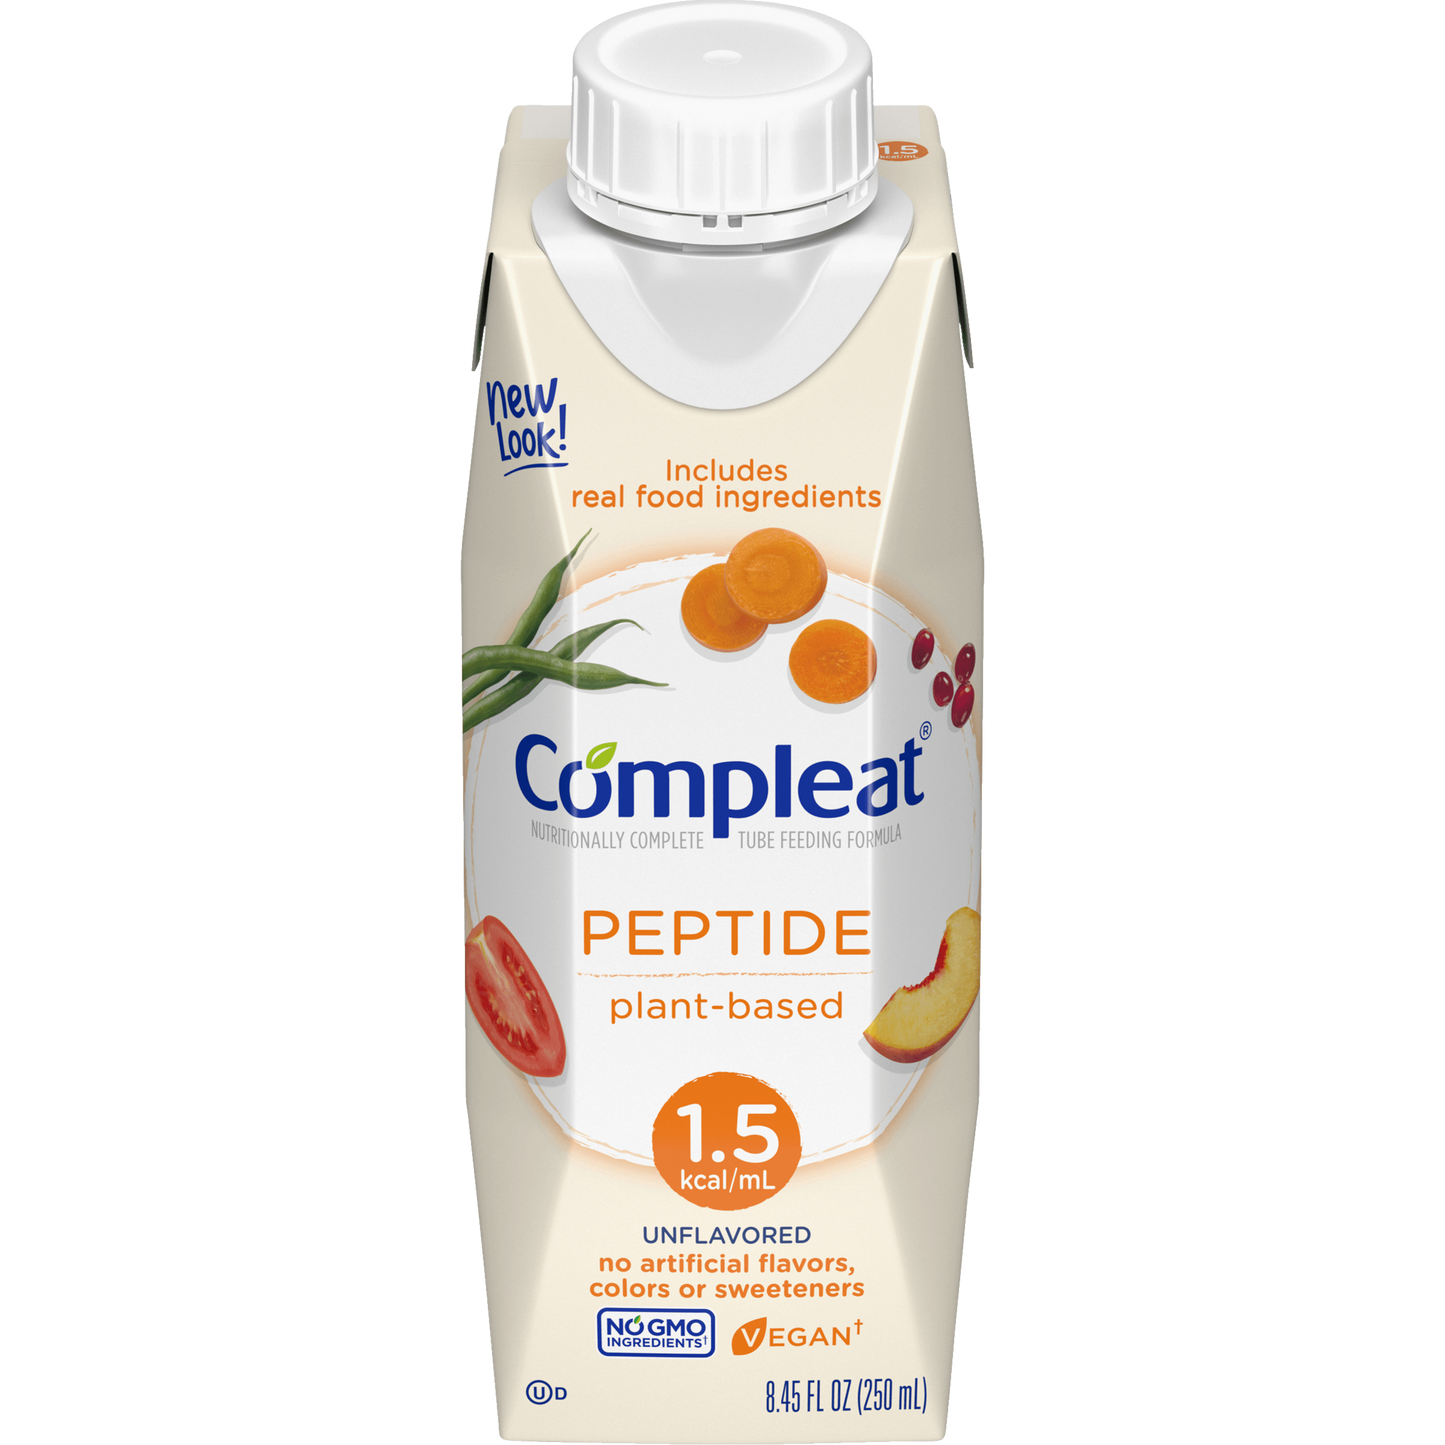 Compleat Peptide 1.5 Plant Based Formula Unflavored, each